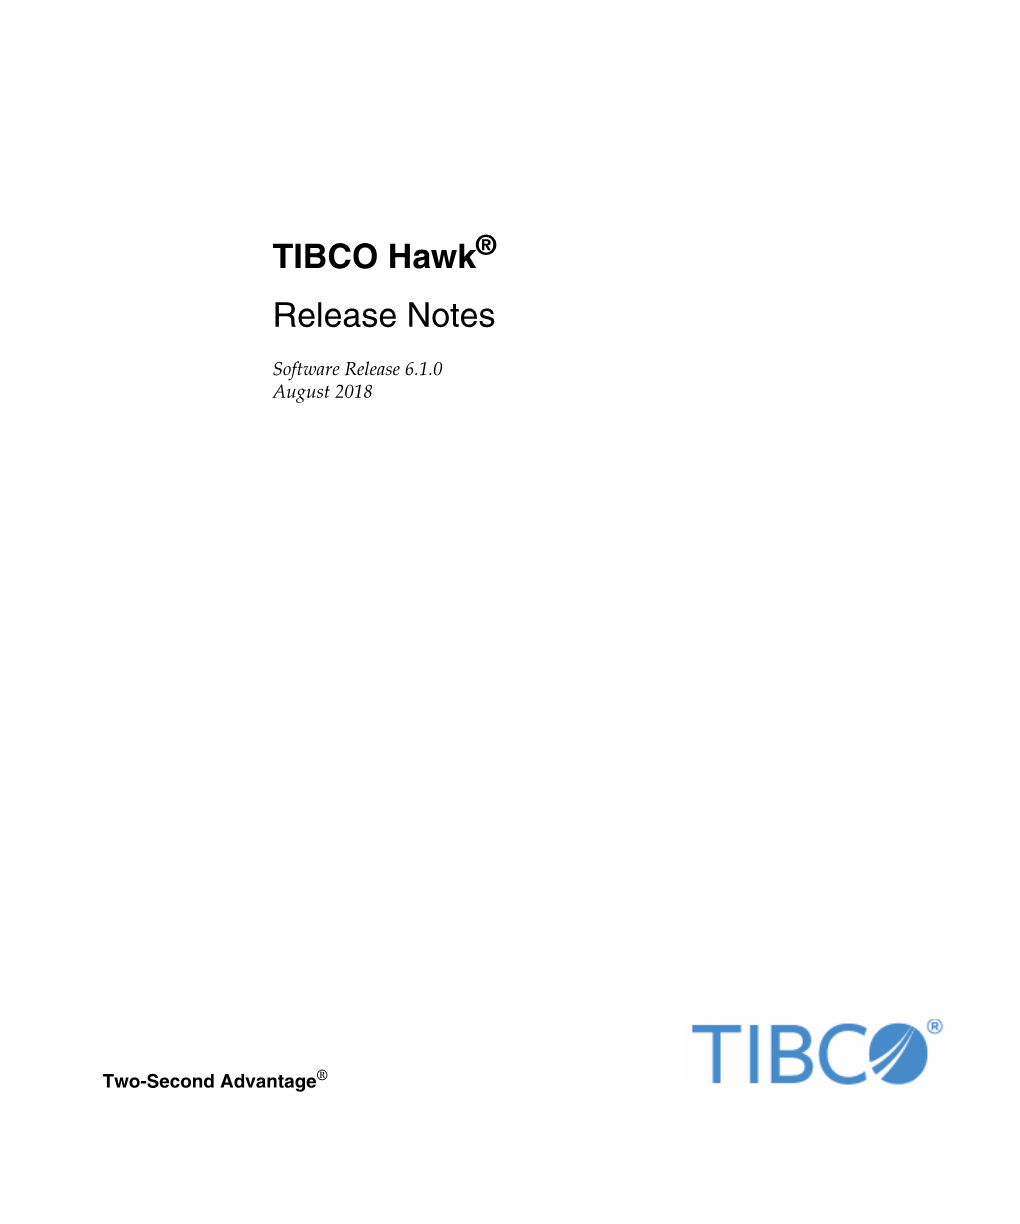 TIBCO Hawk Release Notes Viii | Related Documentation